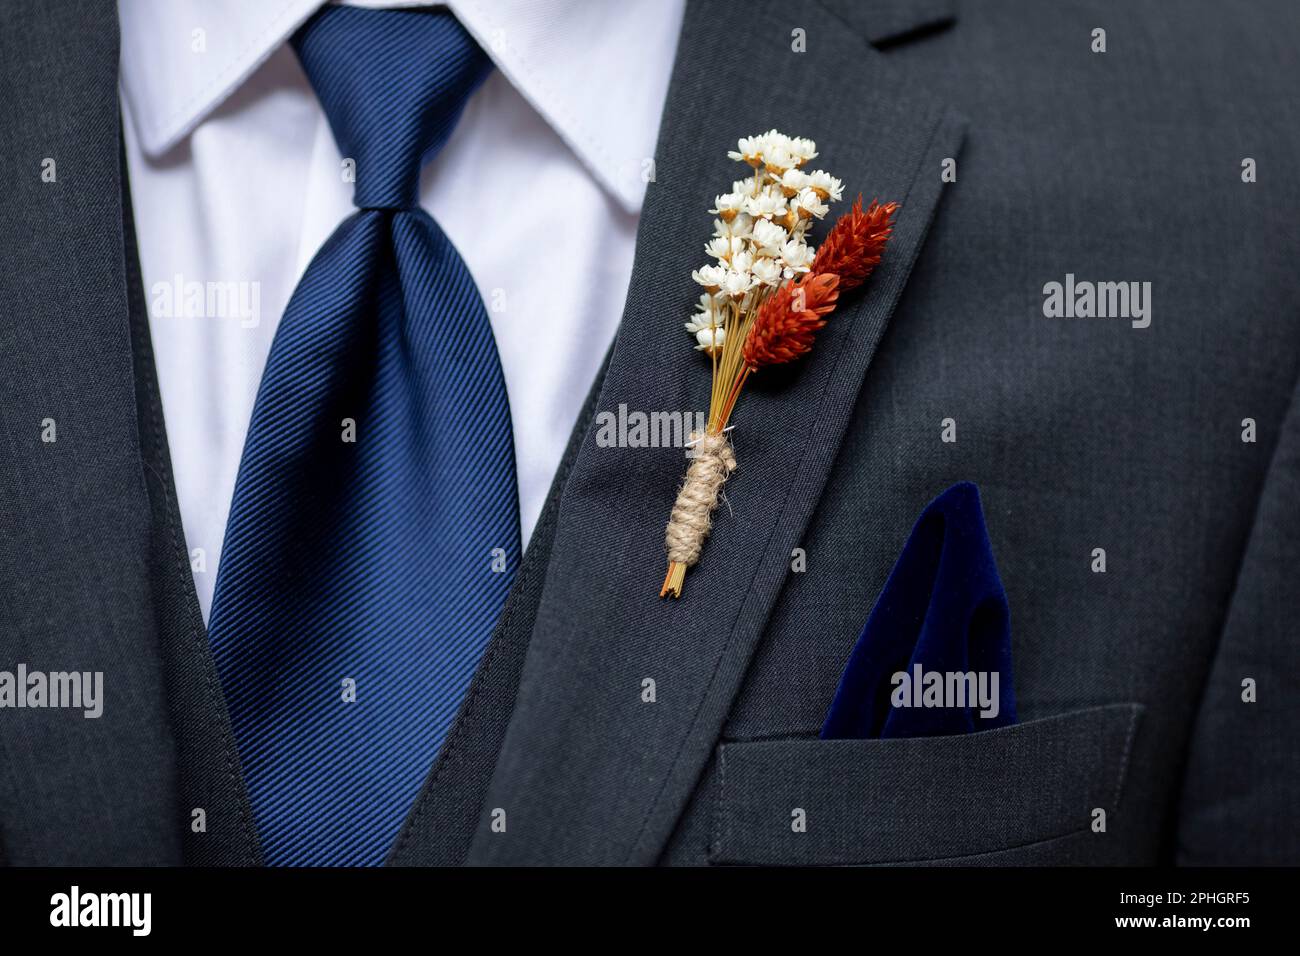 Boutonniere, tie, and handkerchief detail shot on the suit of a groom or groomsman. Stock Photo